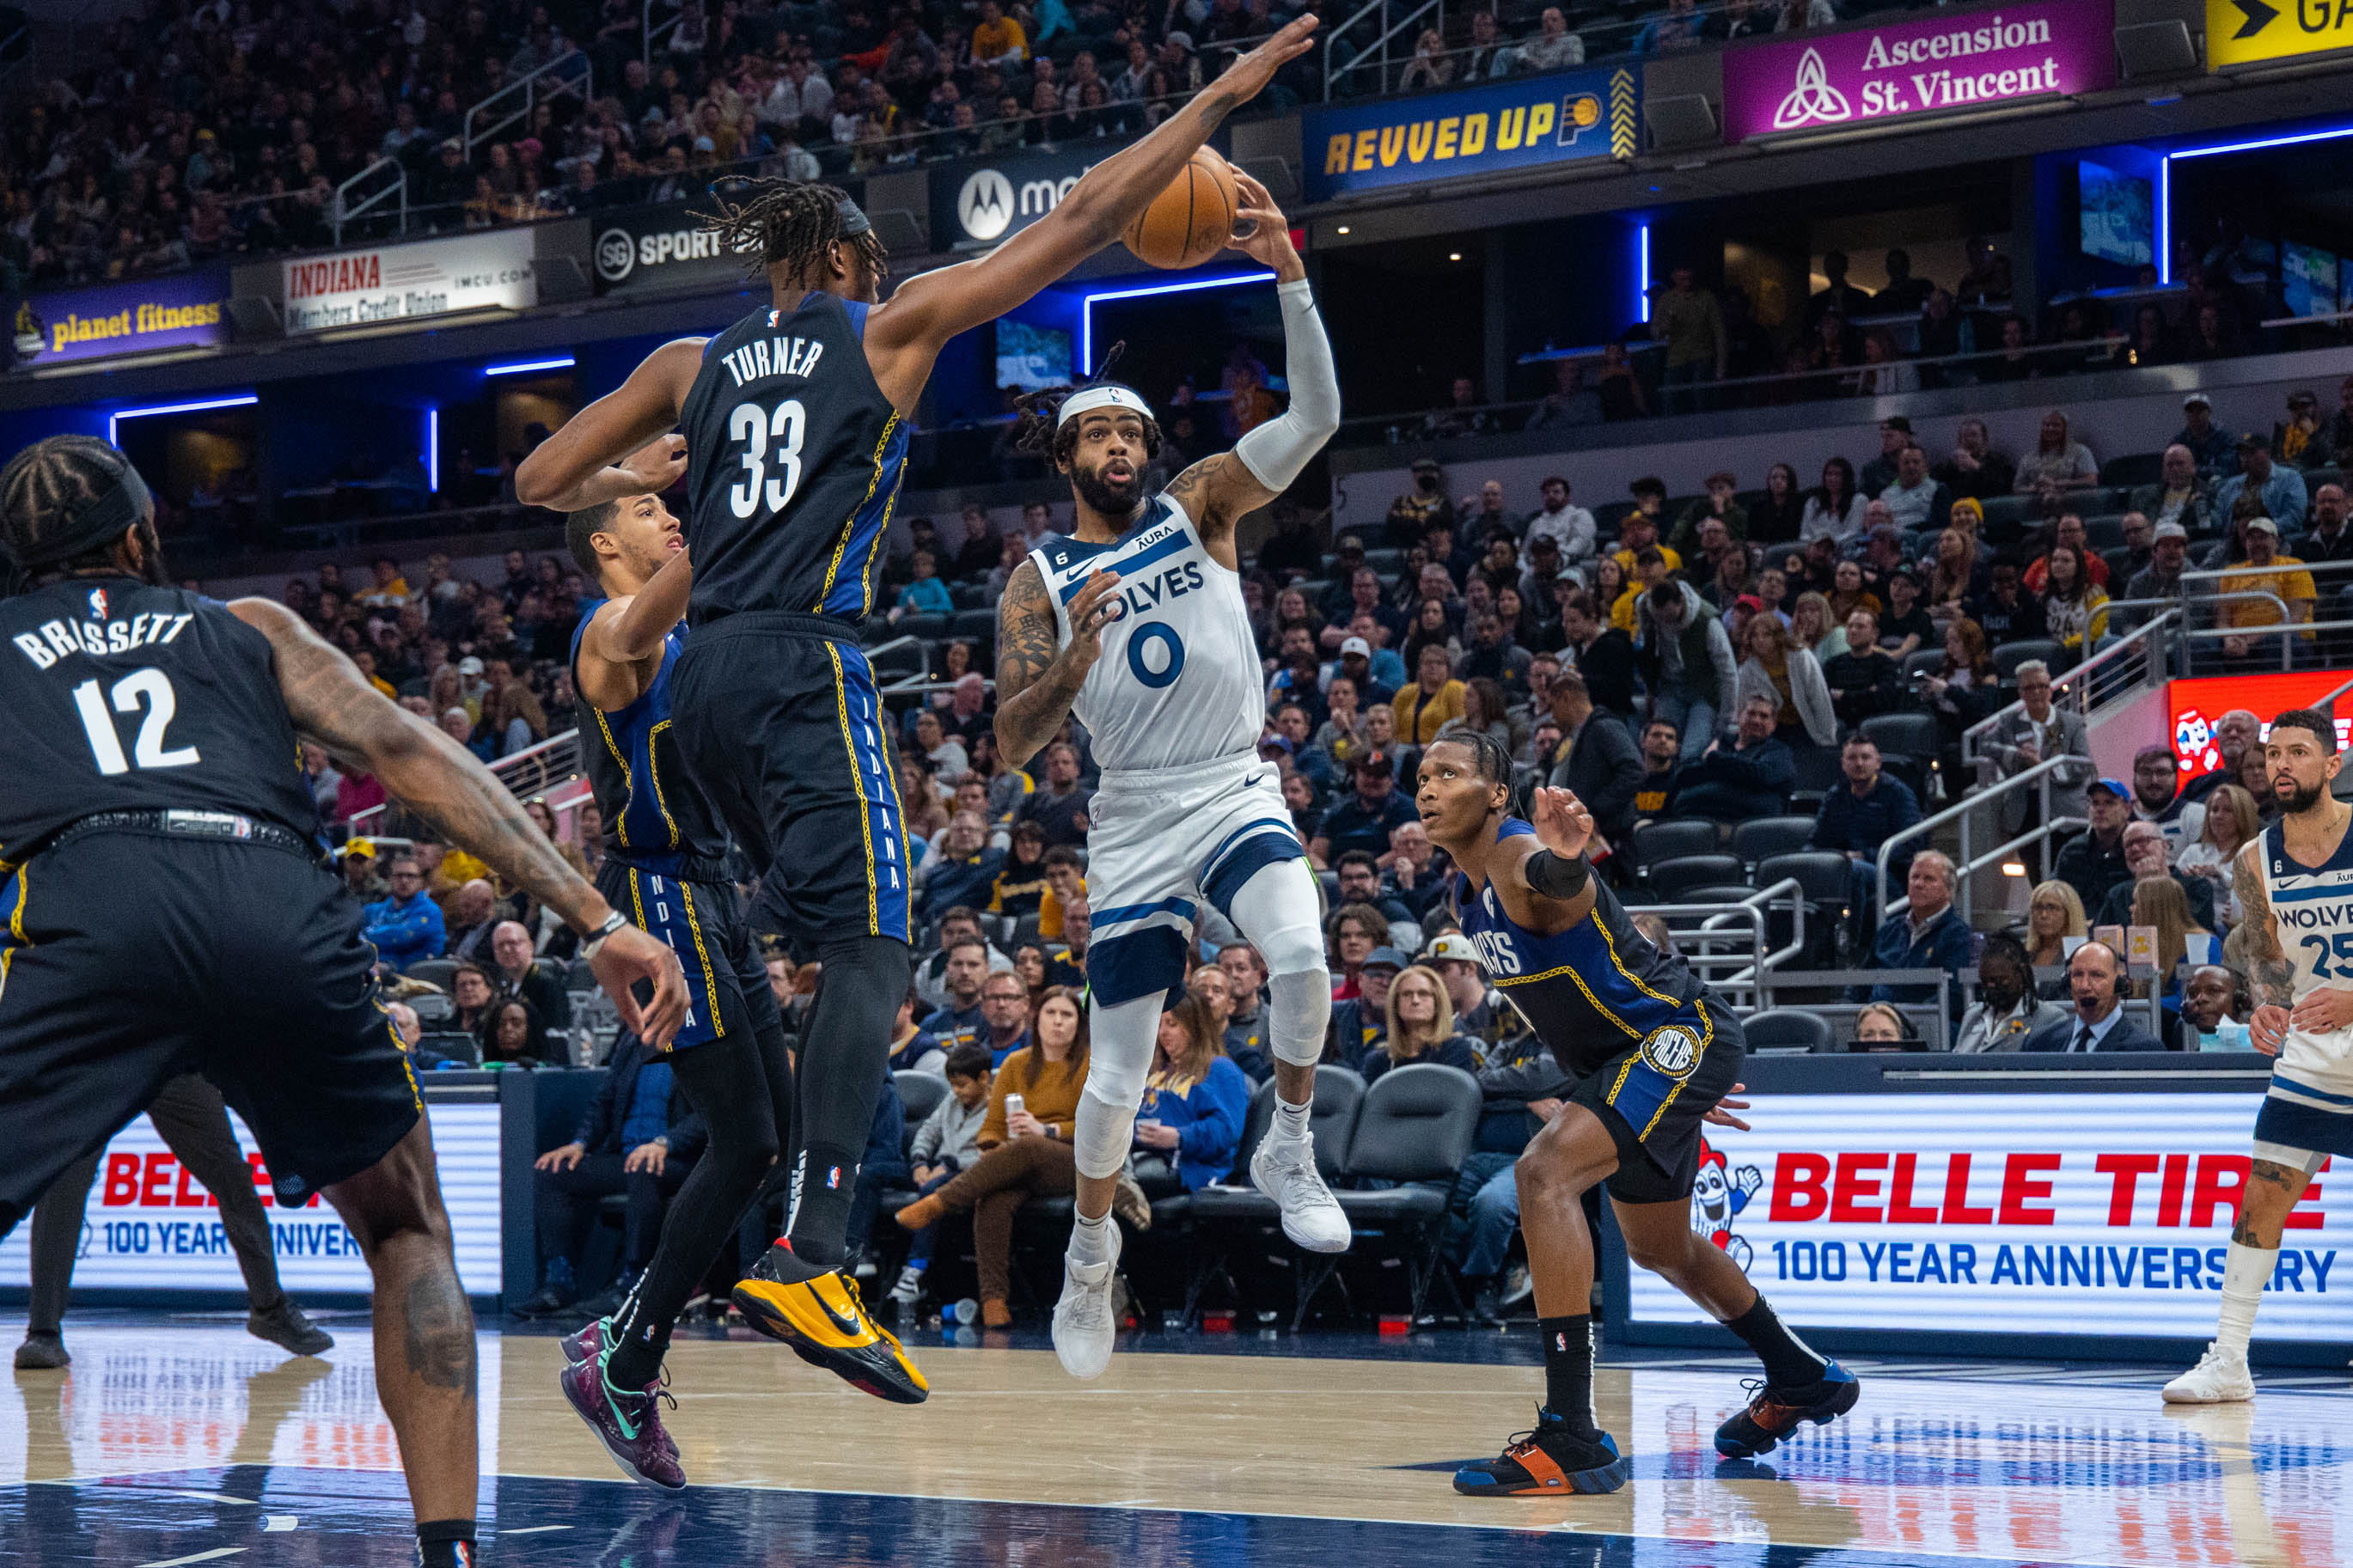 Indiana Pacers can’t overcome slow start as winning streak ends against Minnesota Timberwolves